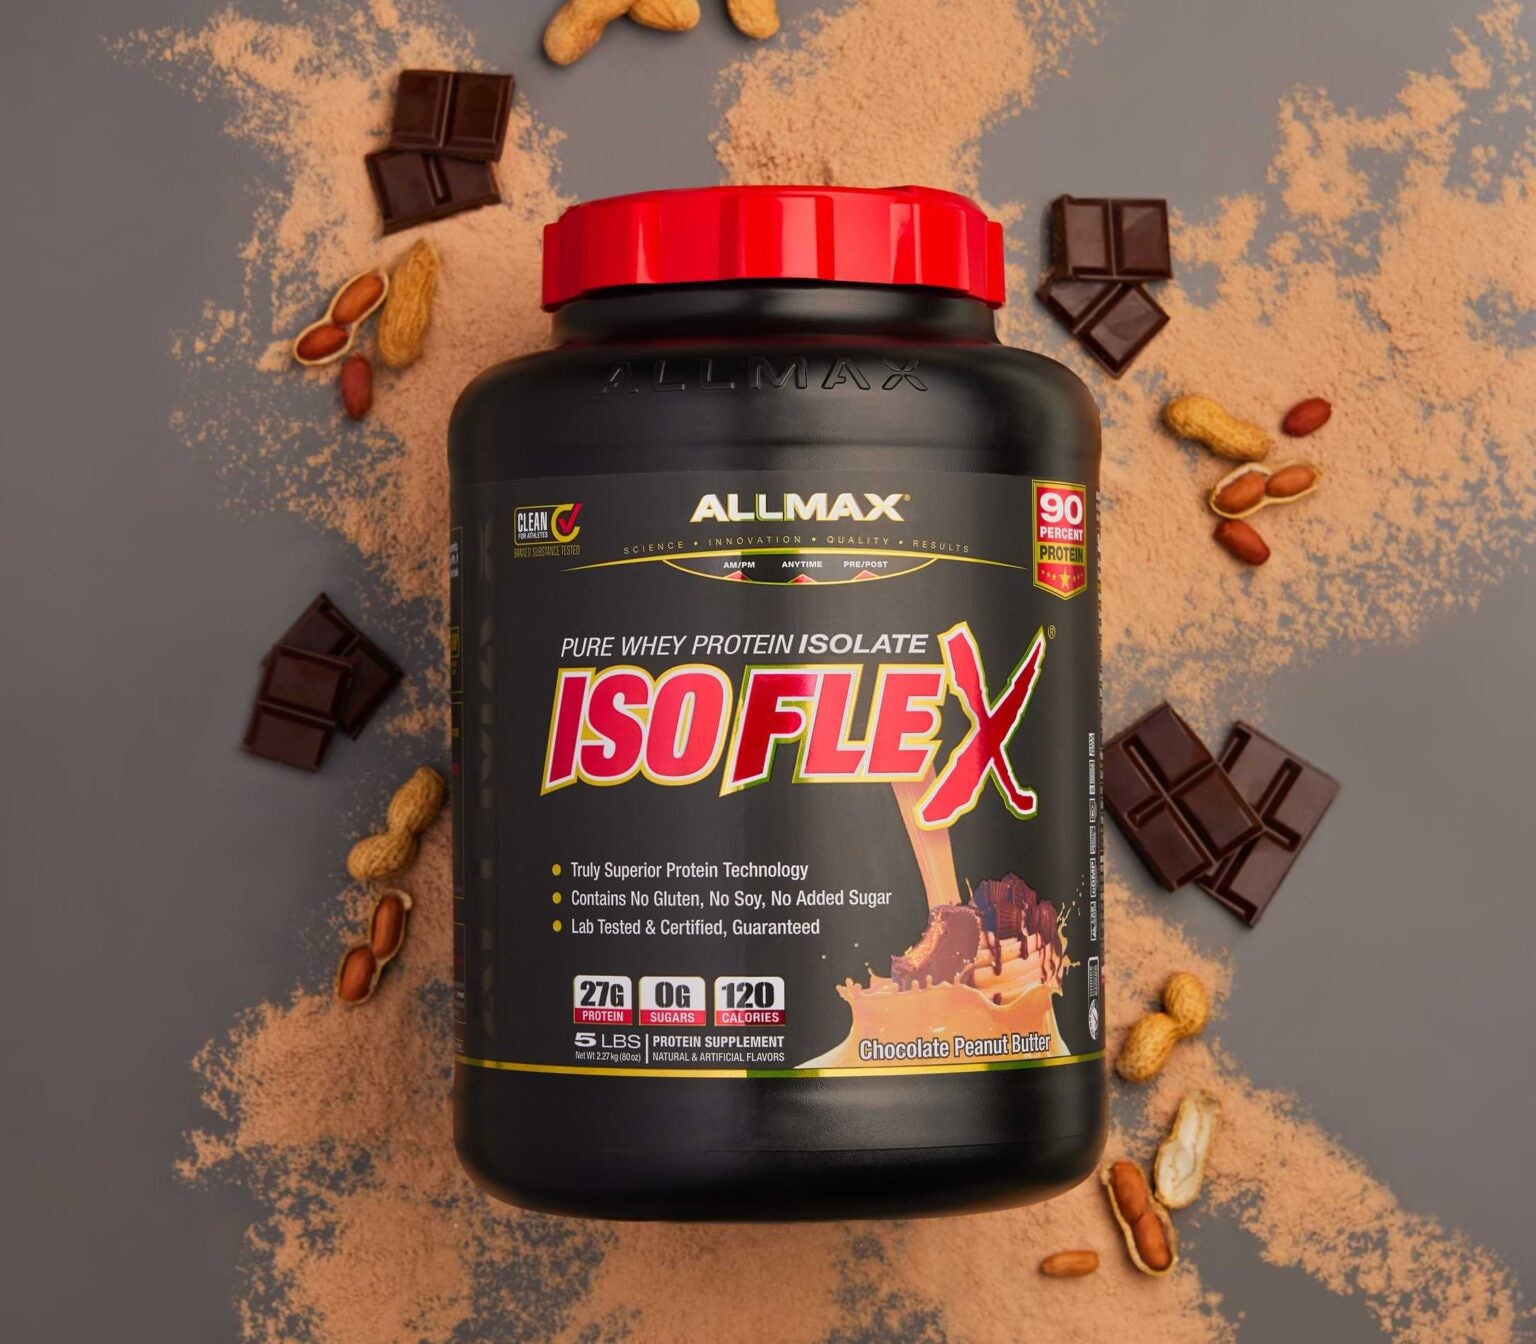 Three Ways Isoflex Can Boost Your Workout